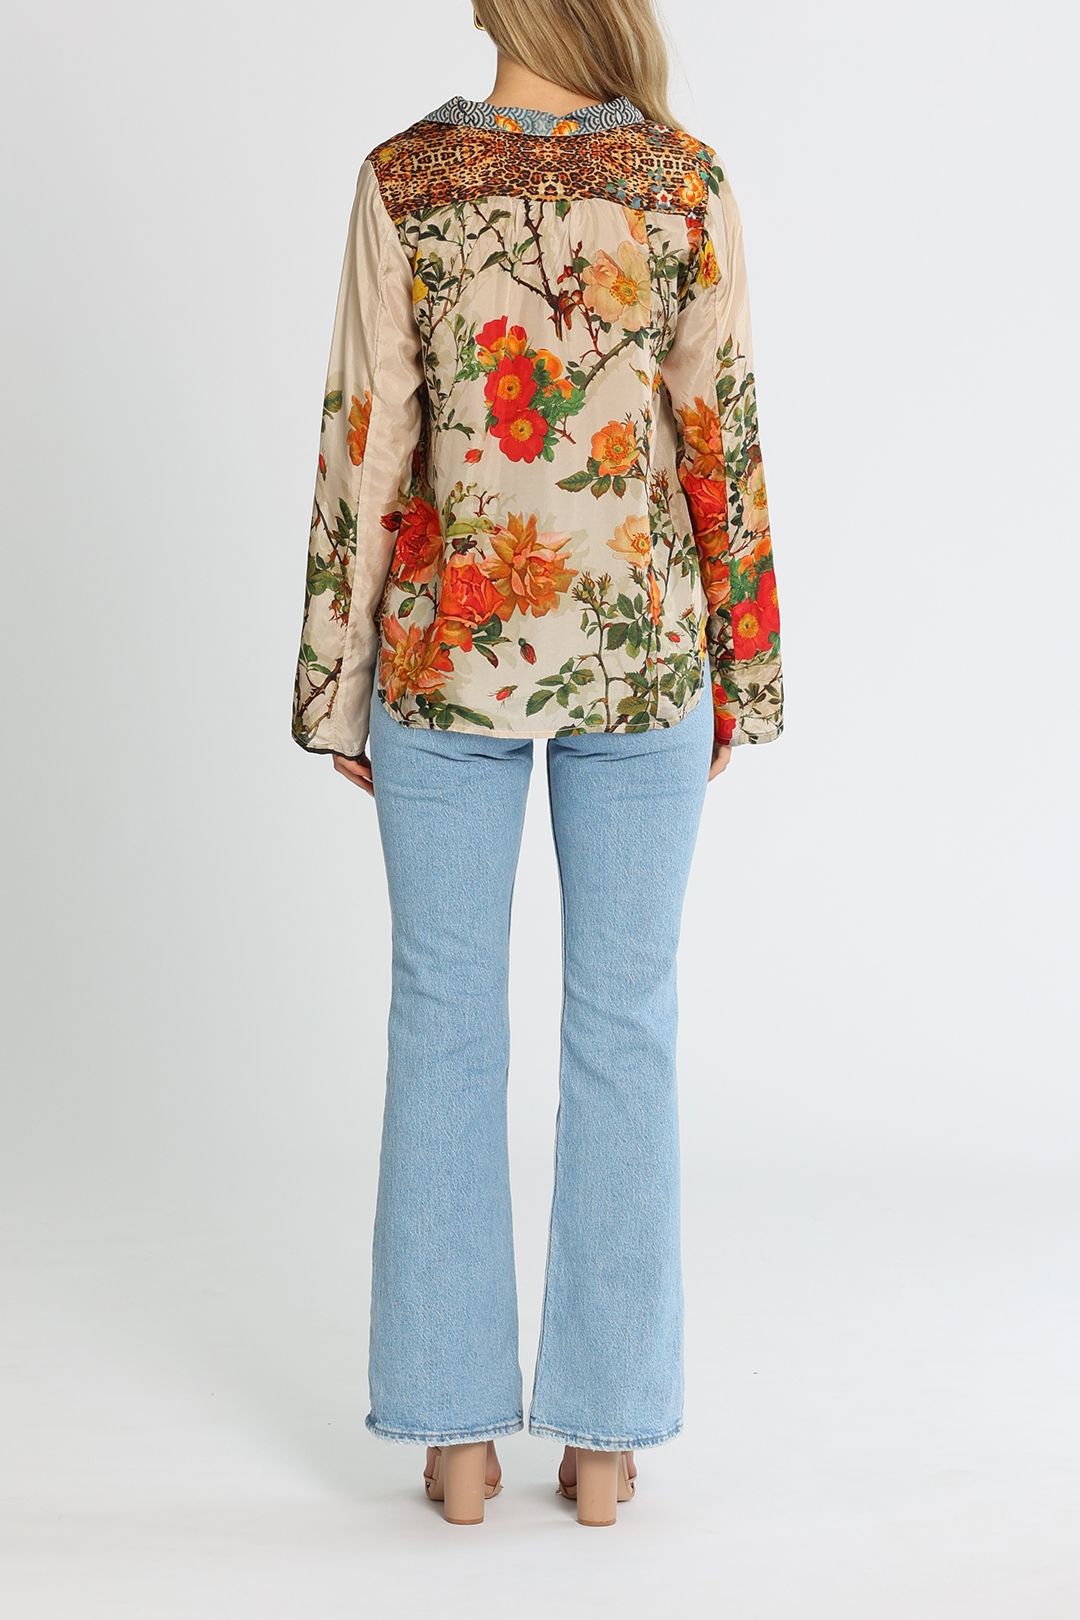 Johnny Was Colette Blouse Multi Relaxed Fit